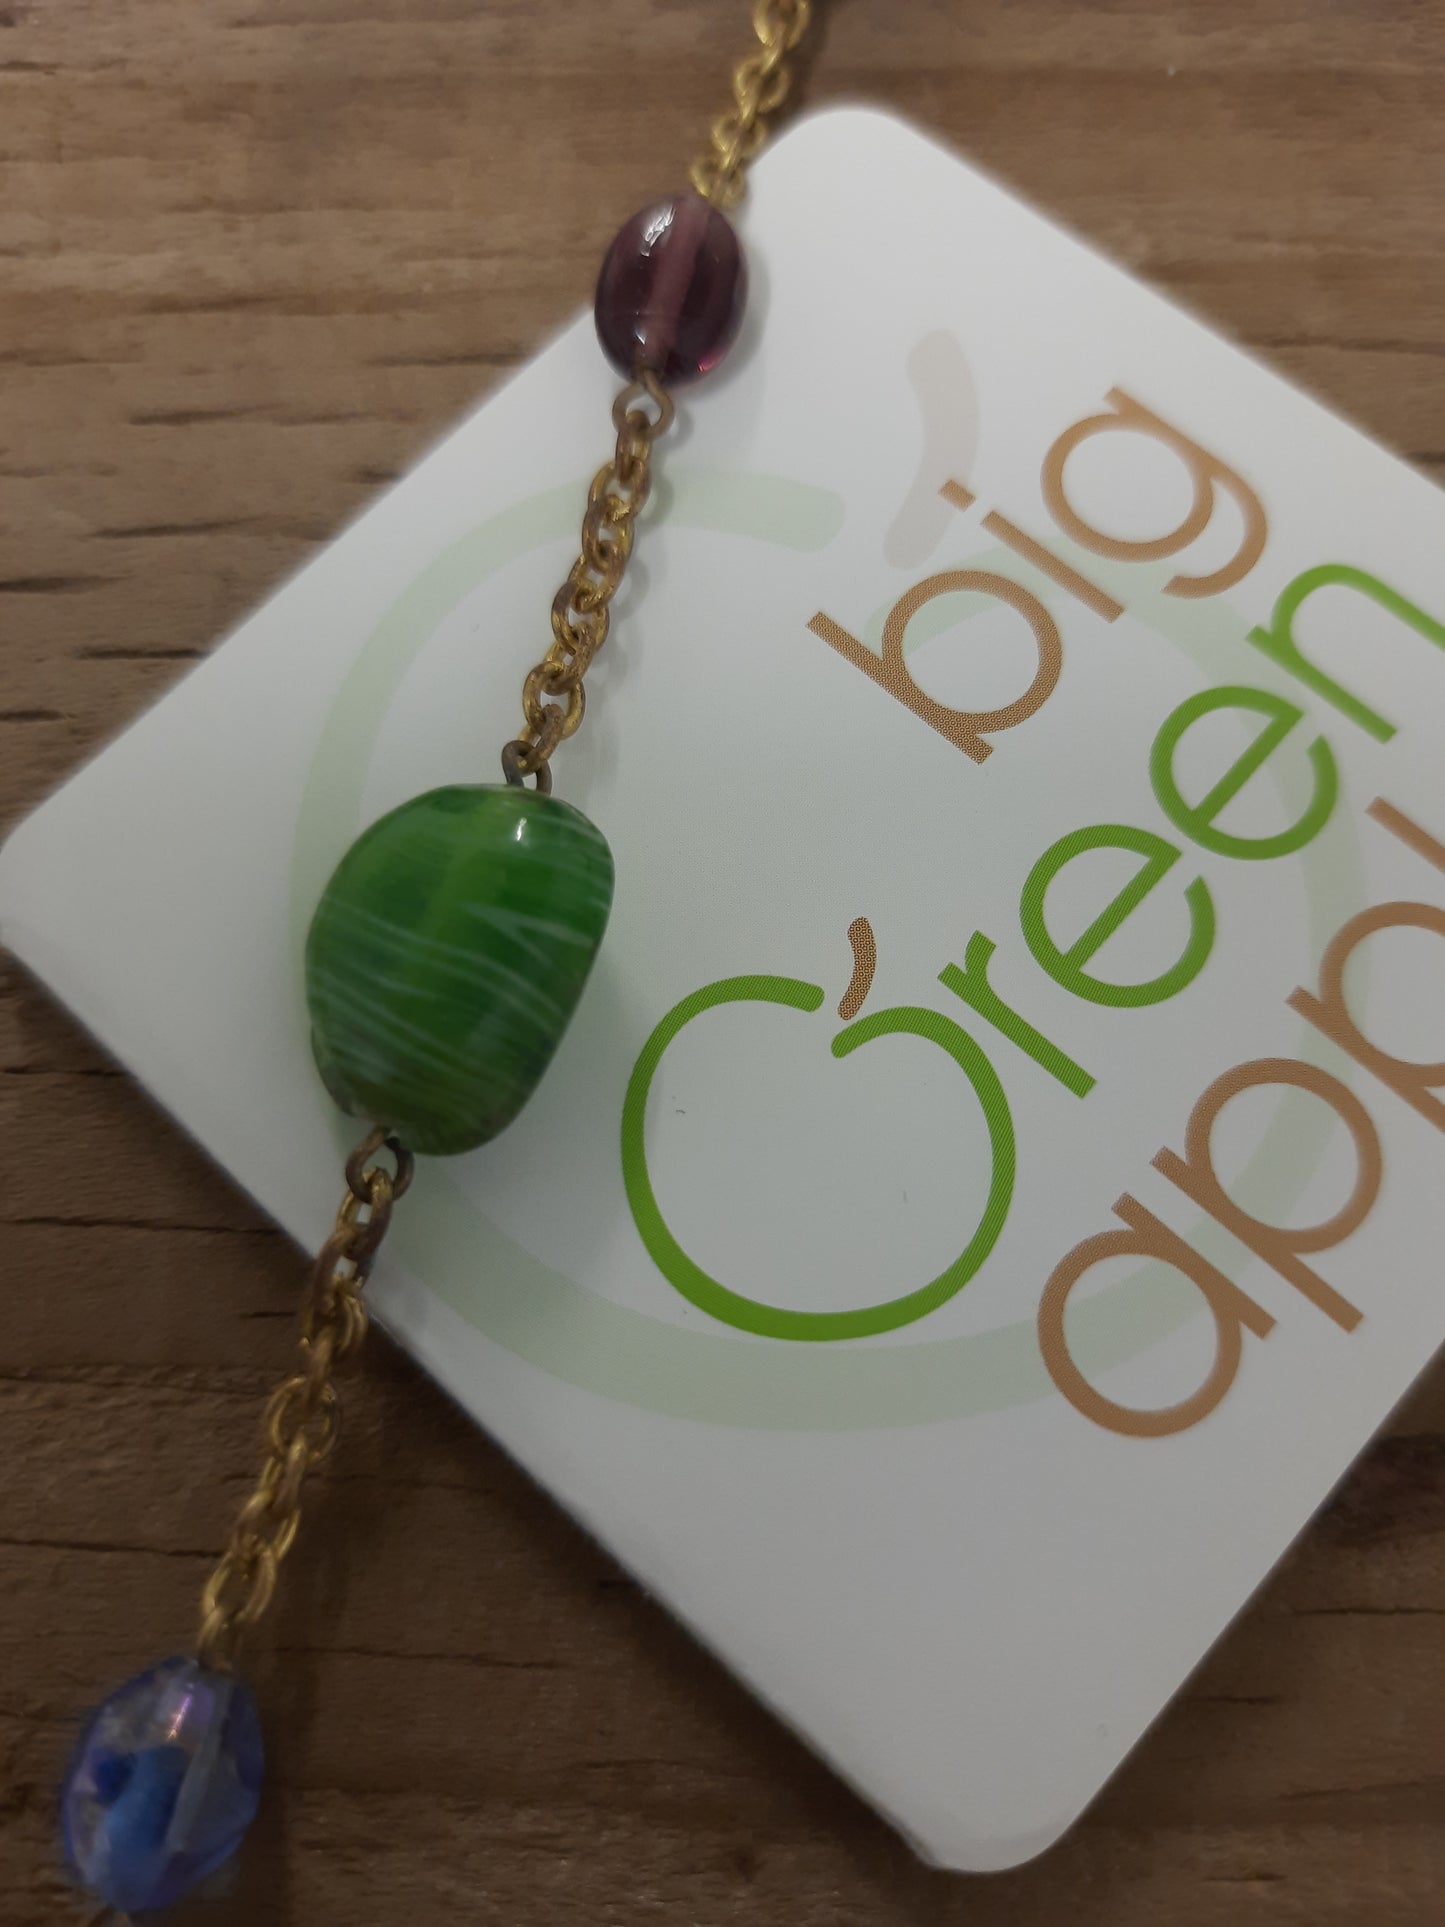 Gift Ideas For Women, Necklaces, Ethical Jewellery, Fair Trade Online Trade, Best Eco Friendly Gifts, Sustainable Gifts For Her, Shop Ethical, BIG GREEN APPLE